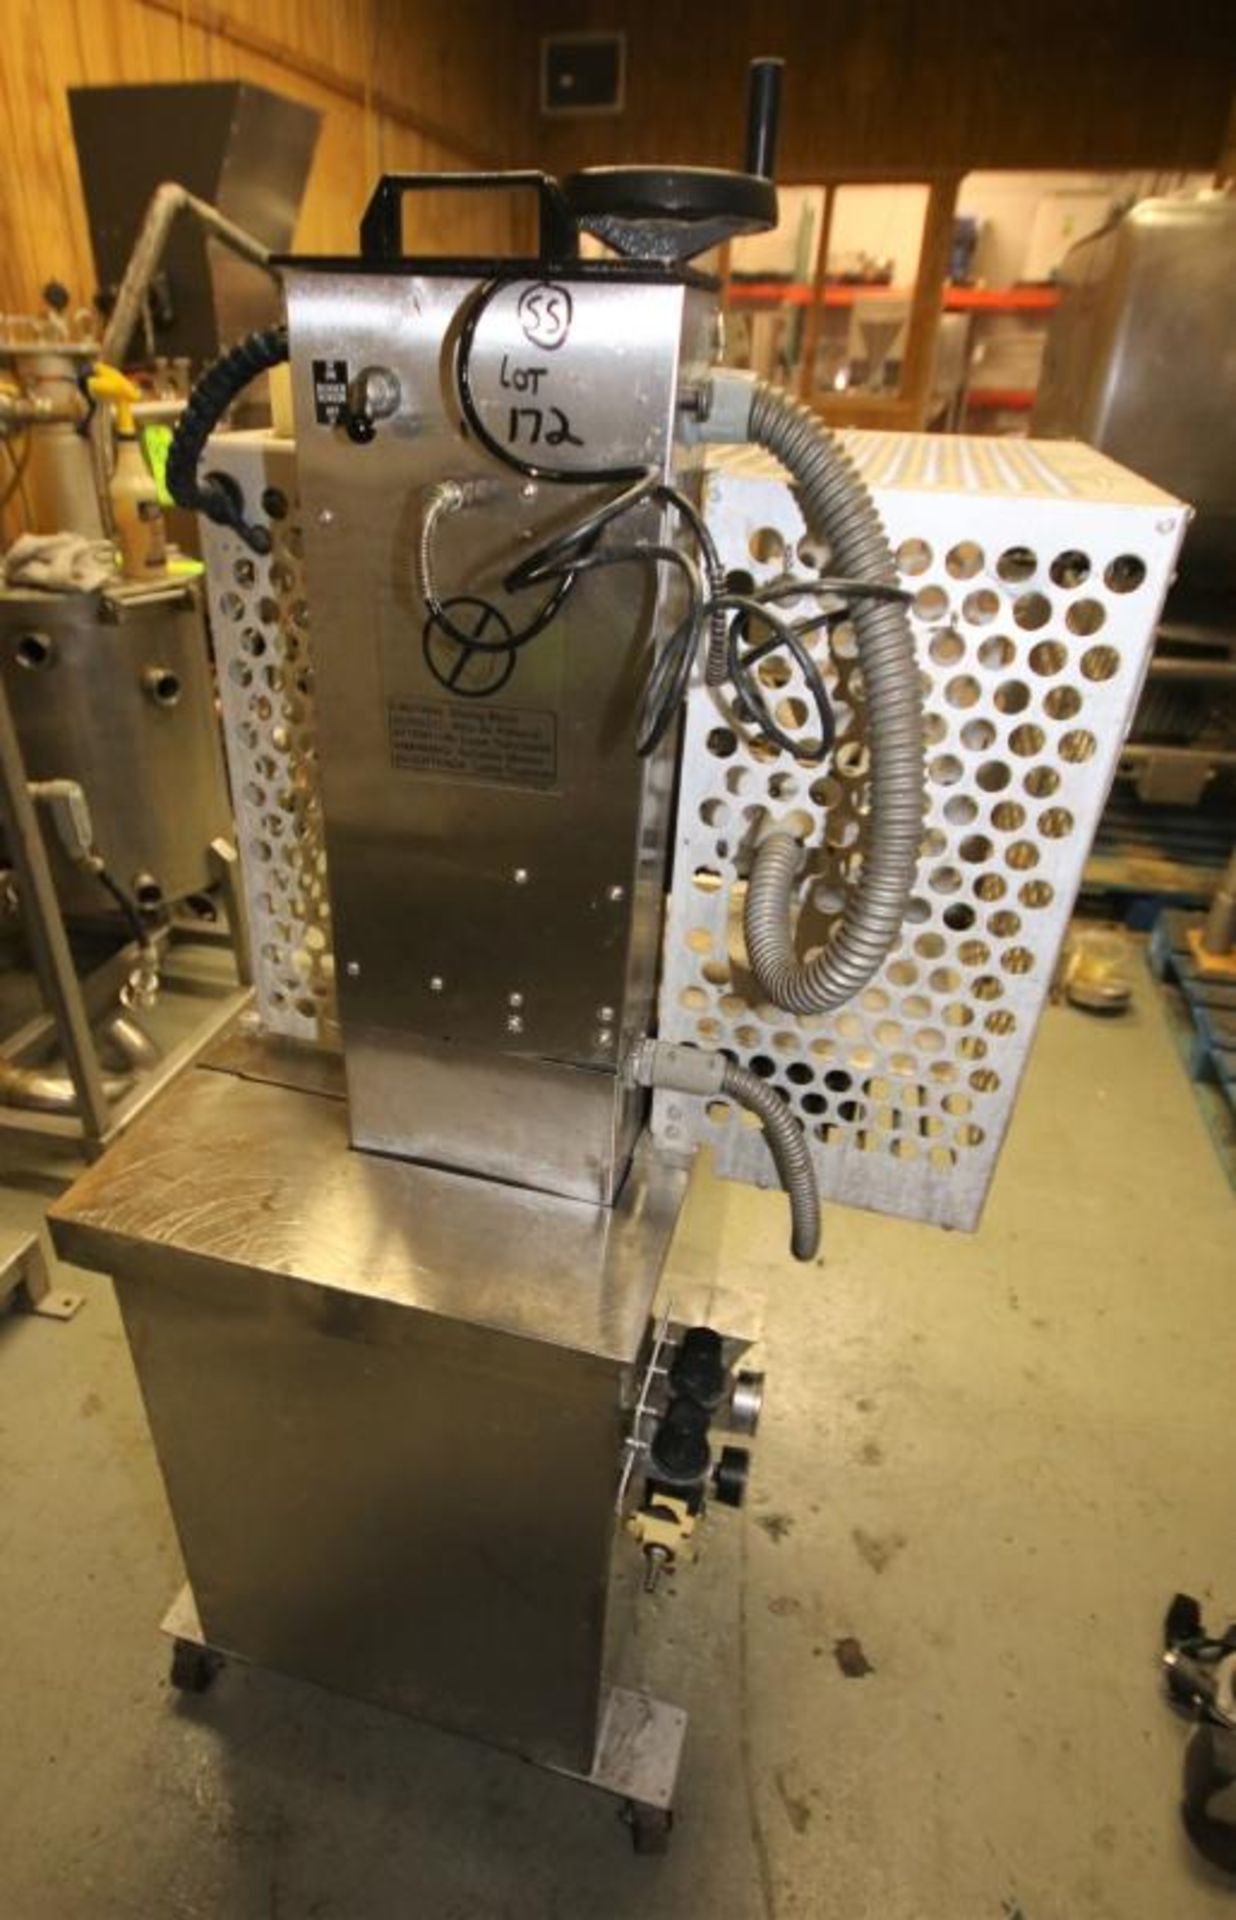 Foodtools Cake Slicer, Model CS - 2ADFC, SN 895205, 100 psi (Located at the MDG Auction Showroom - Image 4 of 6